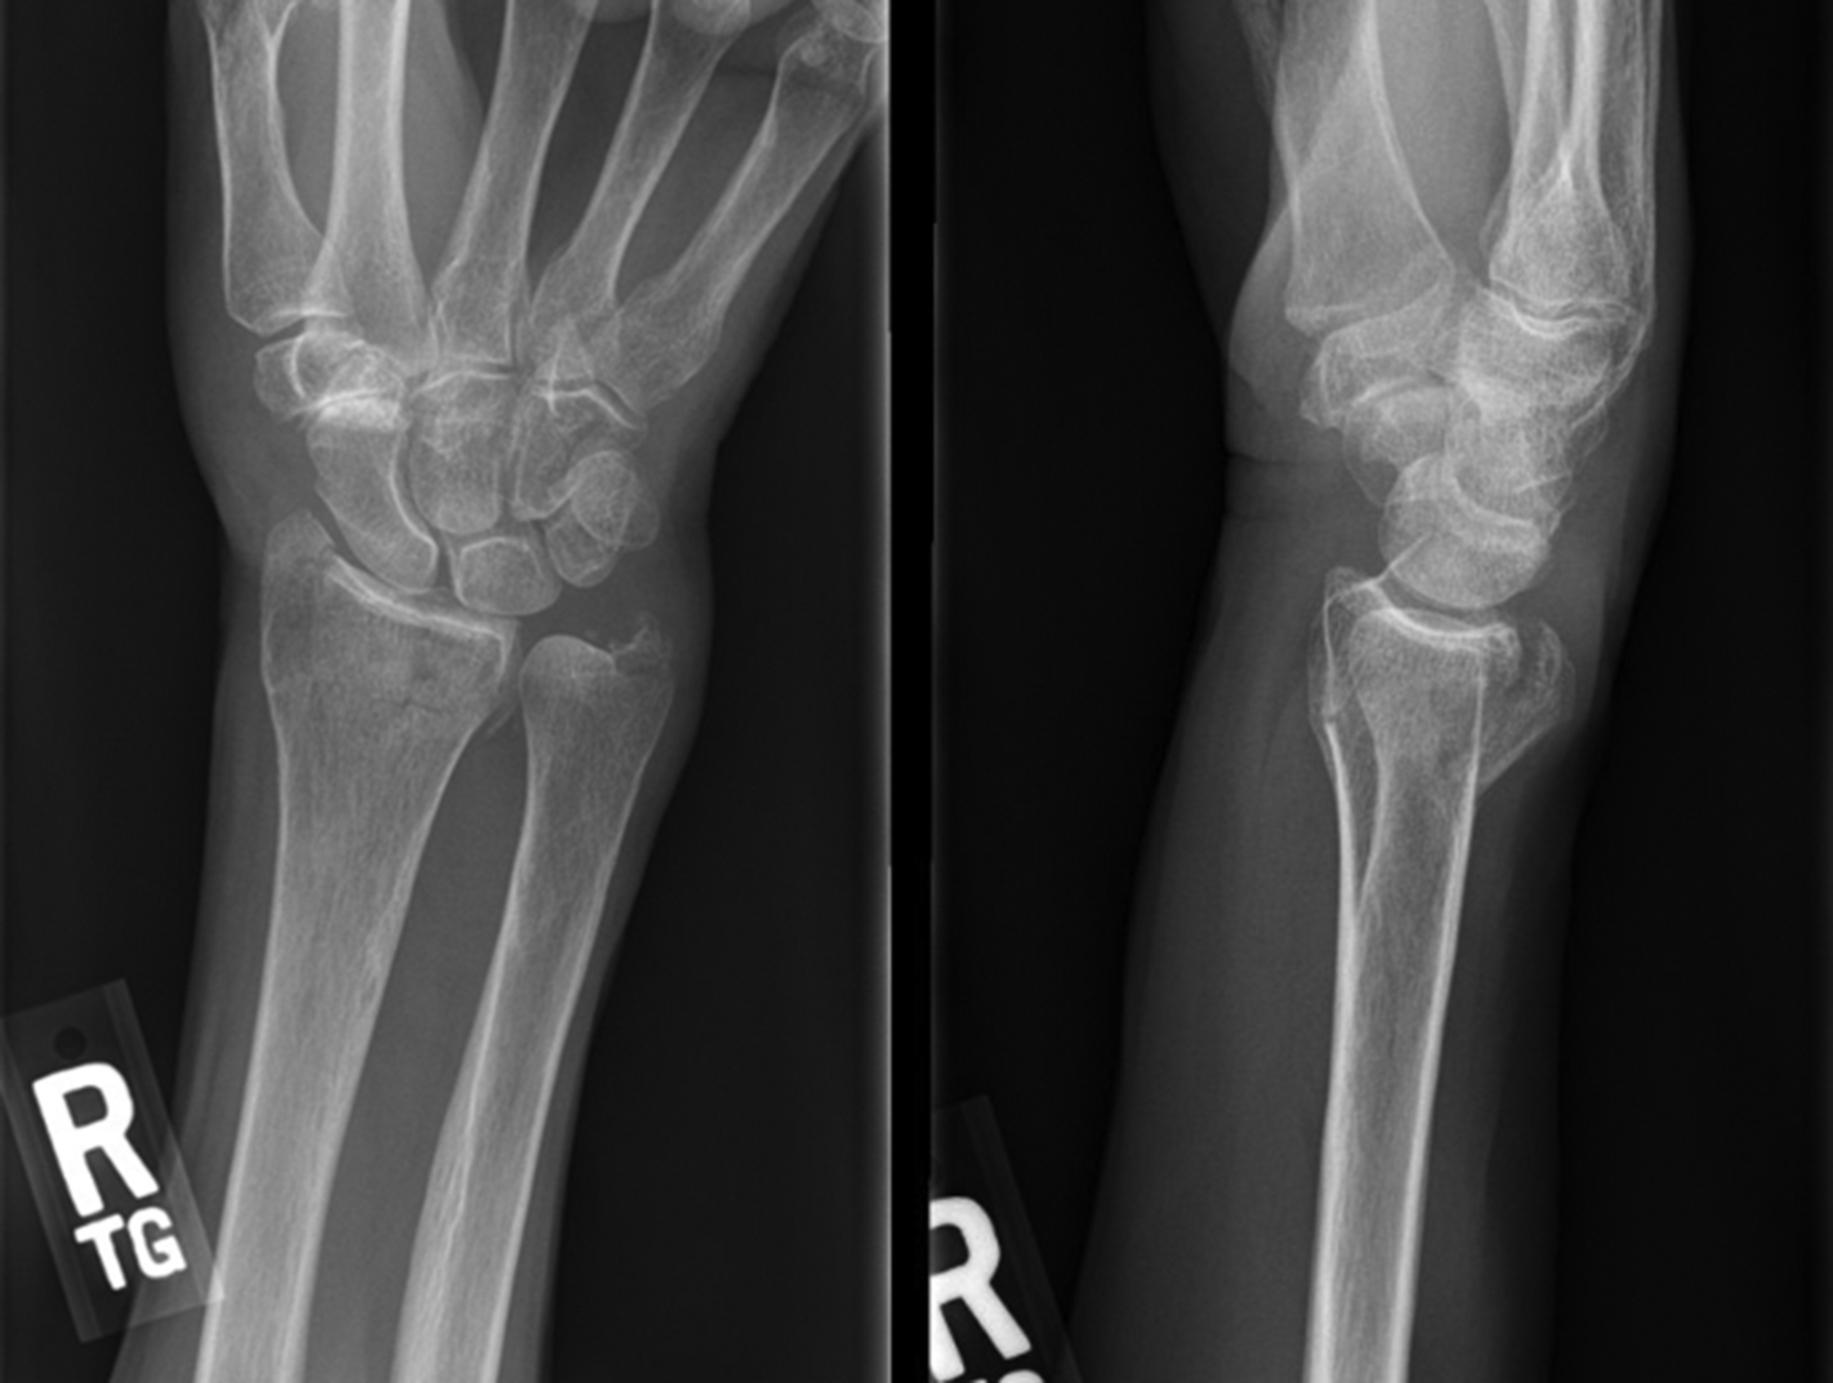 Fig. 1, Initial fracture demonstrating minimal displacement.